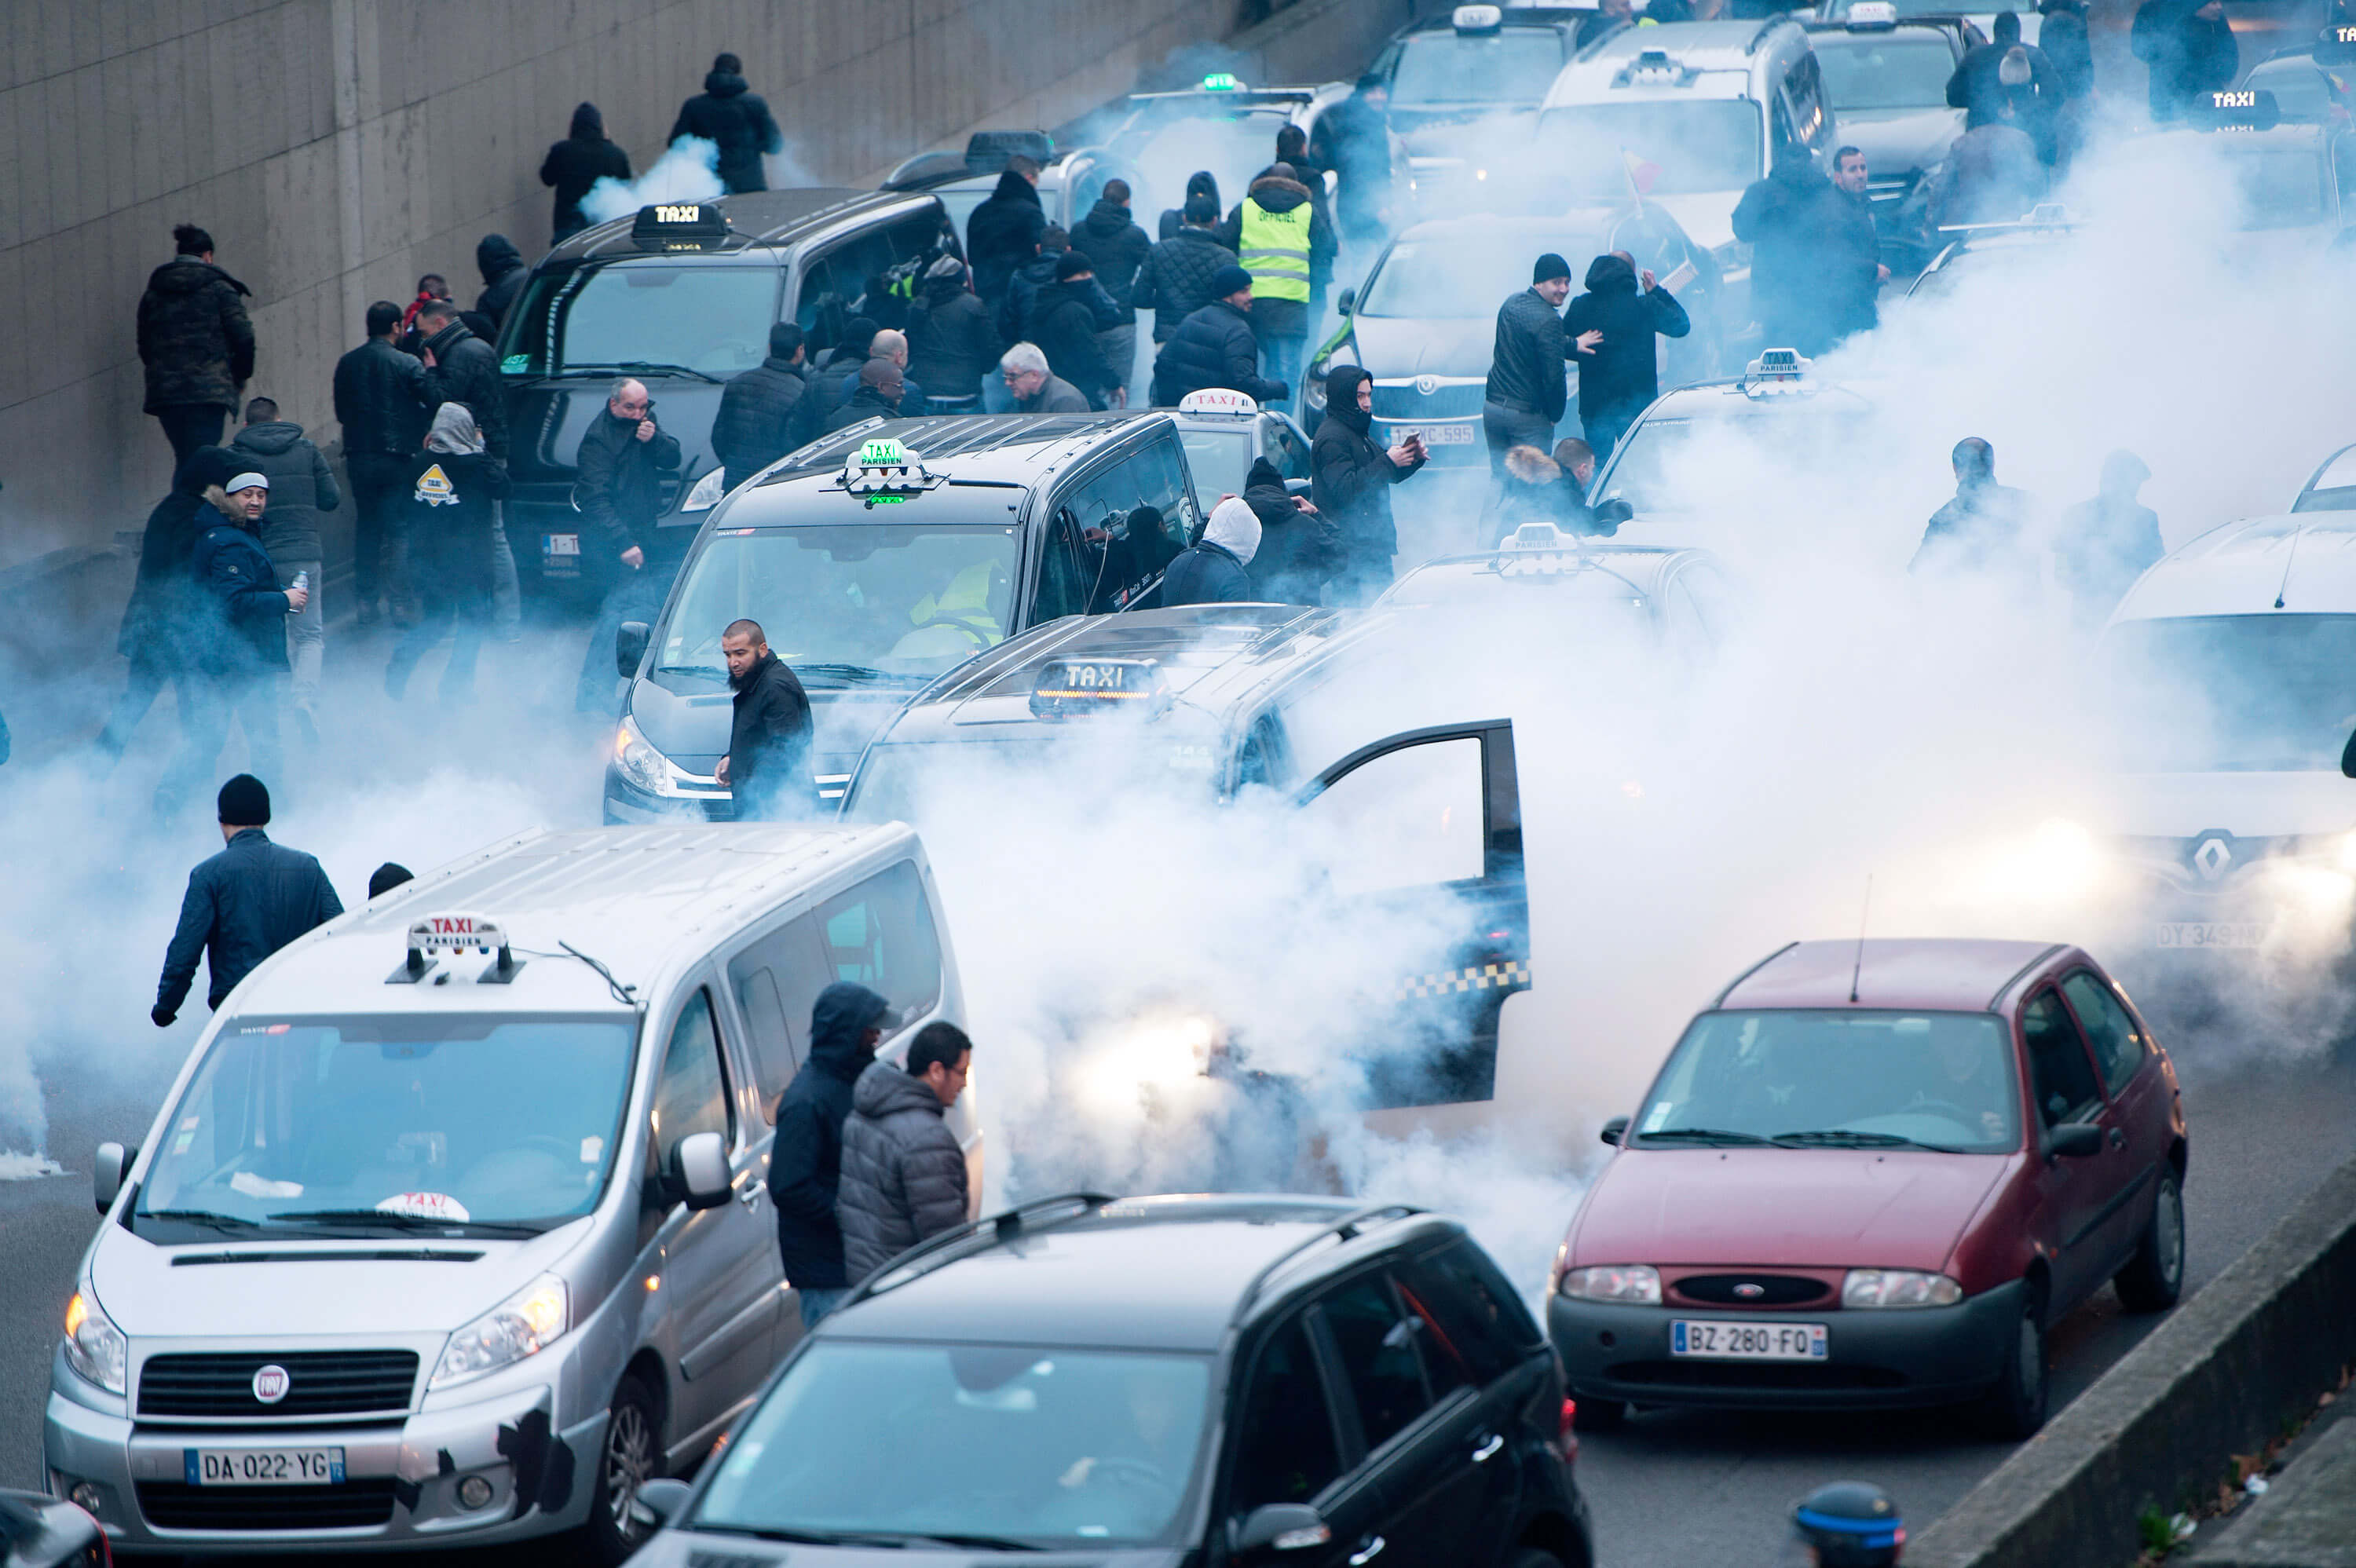 Riot police use tear gas as taxi drivers demonstrate by blocking the traffic on the peripherique by setting tires on fire, on January 26, 2016 in Paris, France.